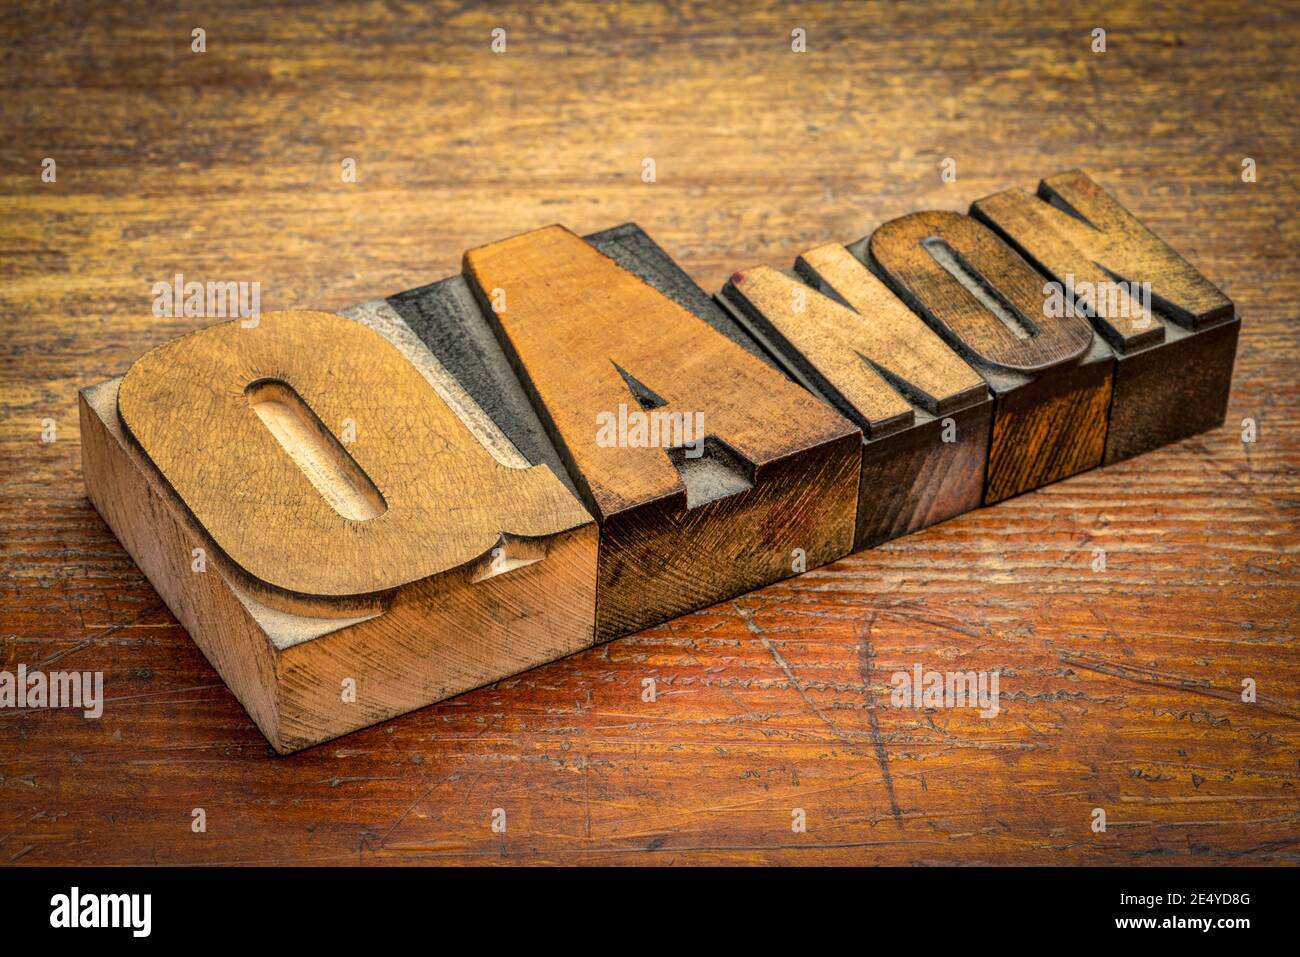 QAnon word abstract in vintage letterpress wood type against rustic wooden background, disproven and discredited far-right conspiracy theory Stock Photo